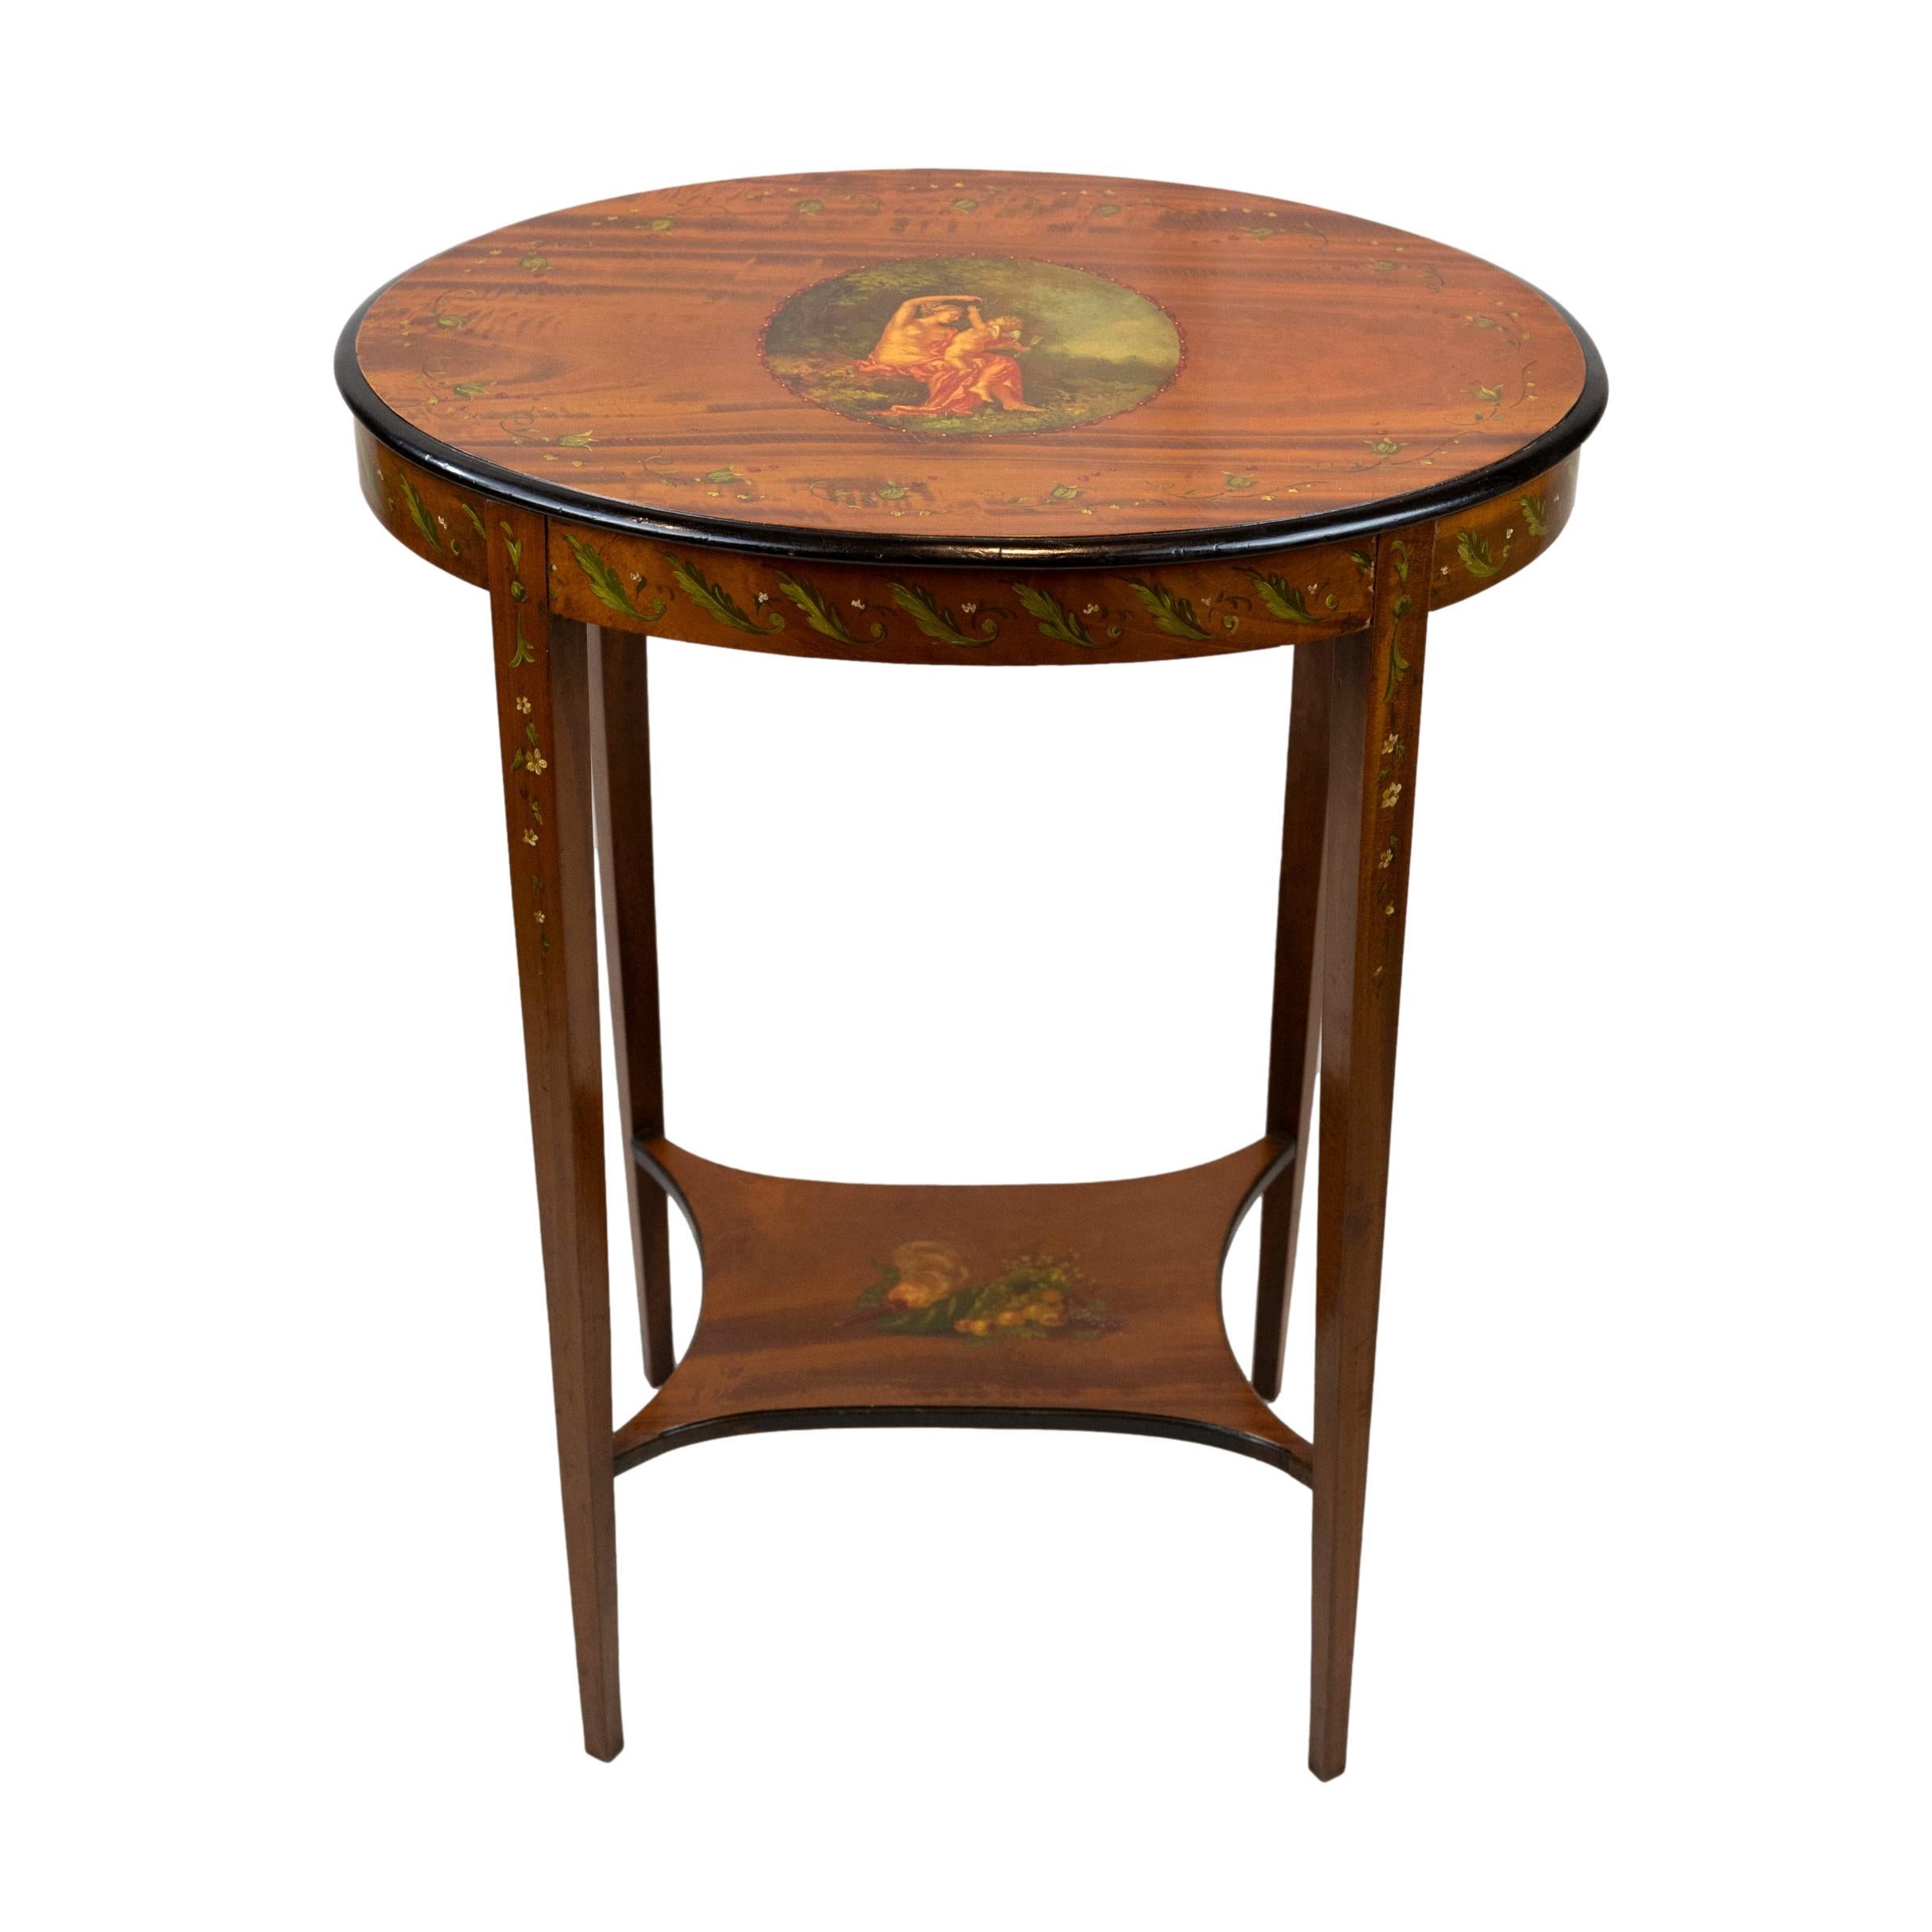 Hand-Crafted Edwardian Painted Satinwood Two-Tier Occasional Table, English, ca. 1900 For Sale